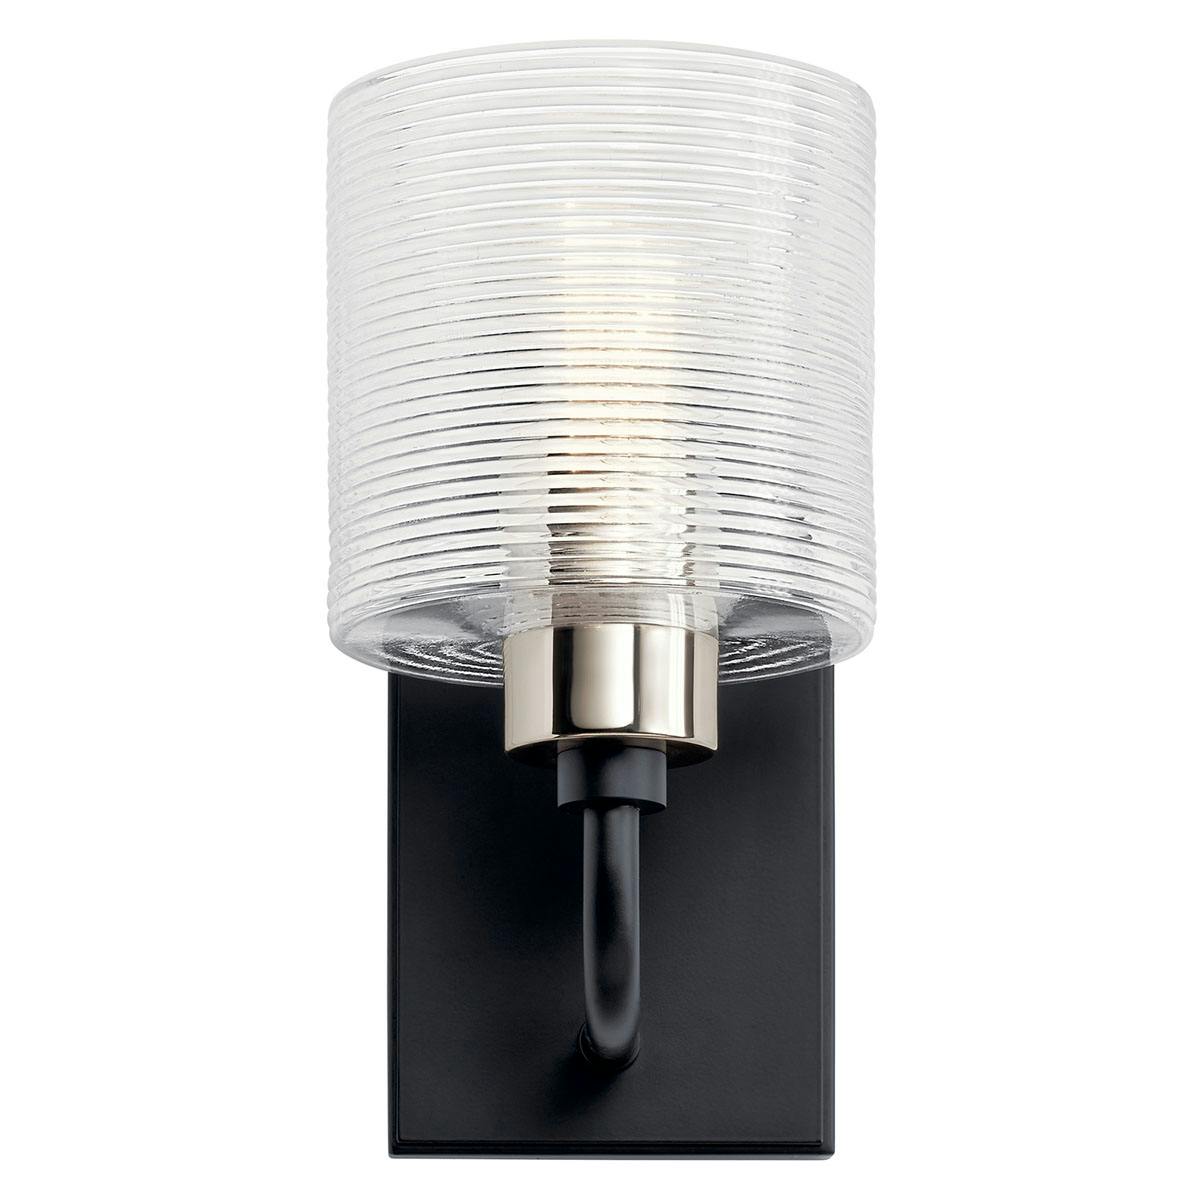 Front view of the Harvan 9.25" 1 Light Sconce Black on a white background